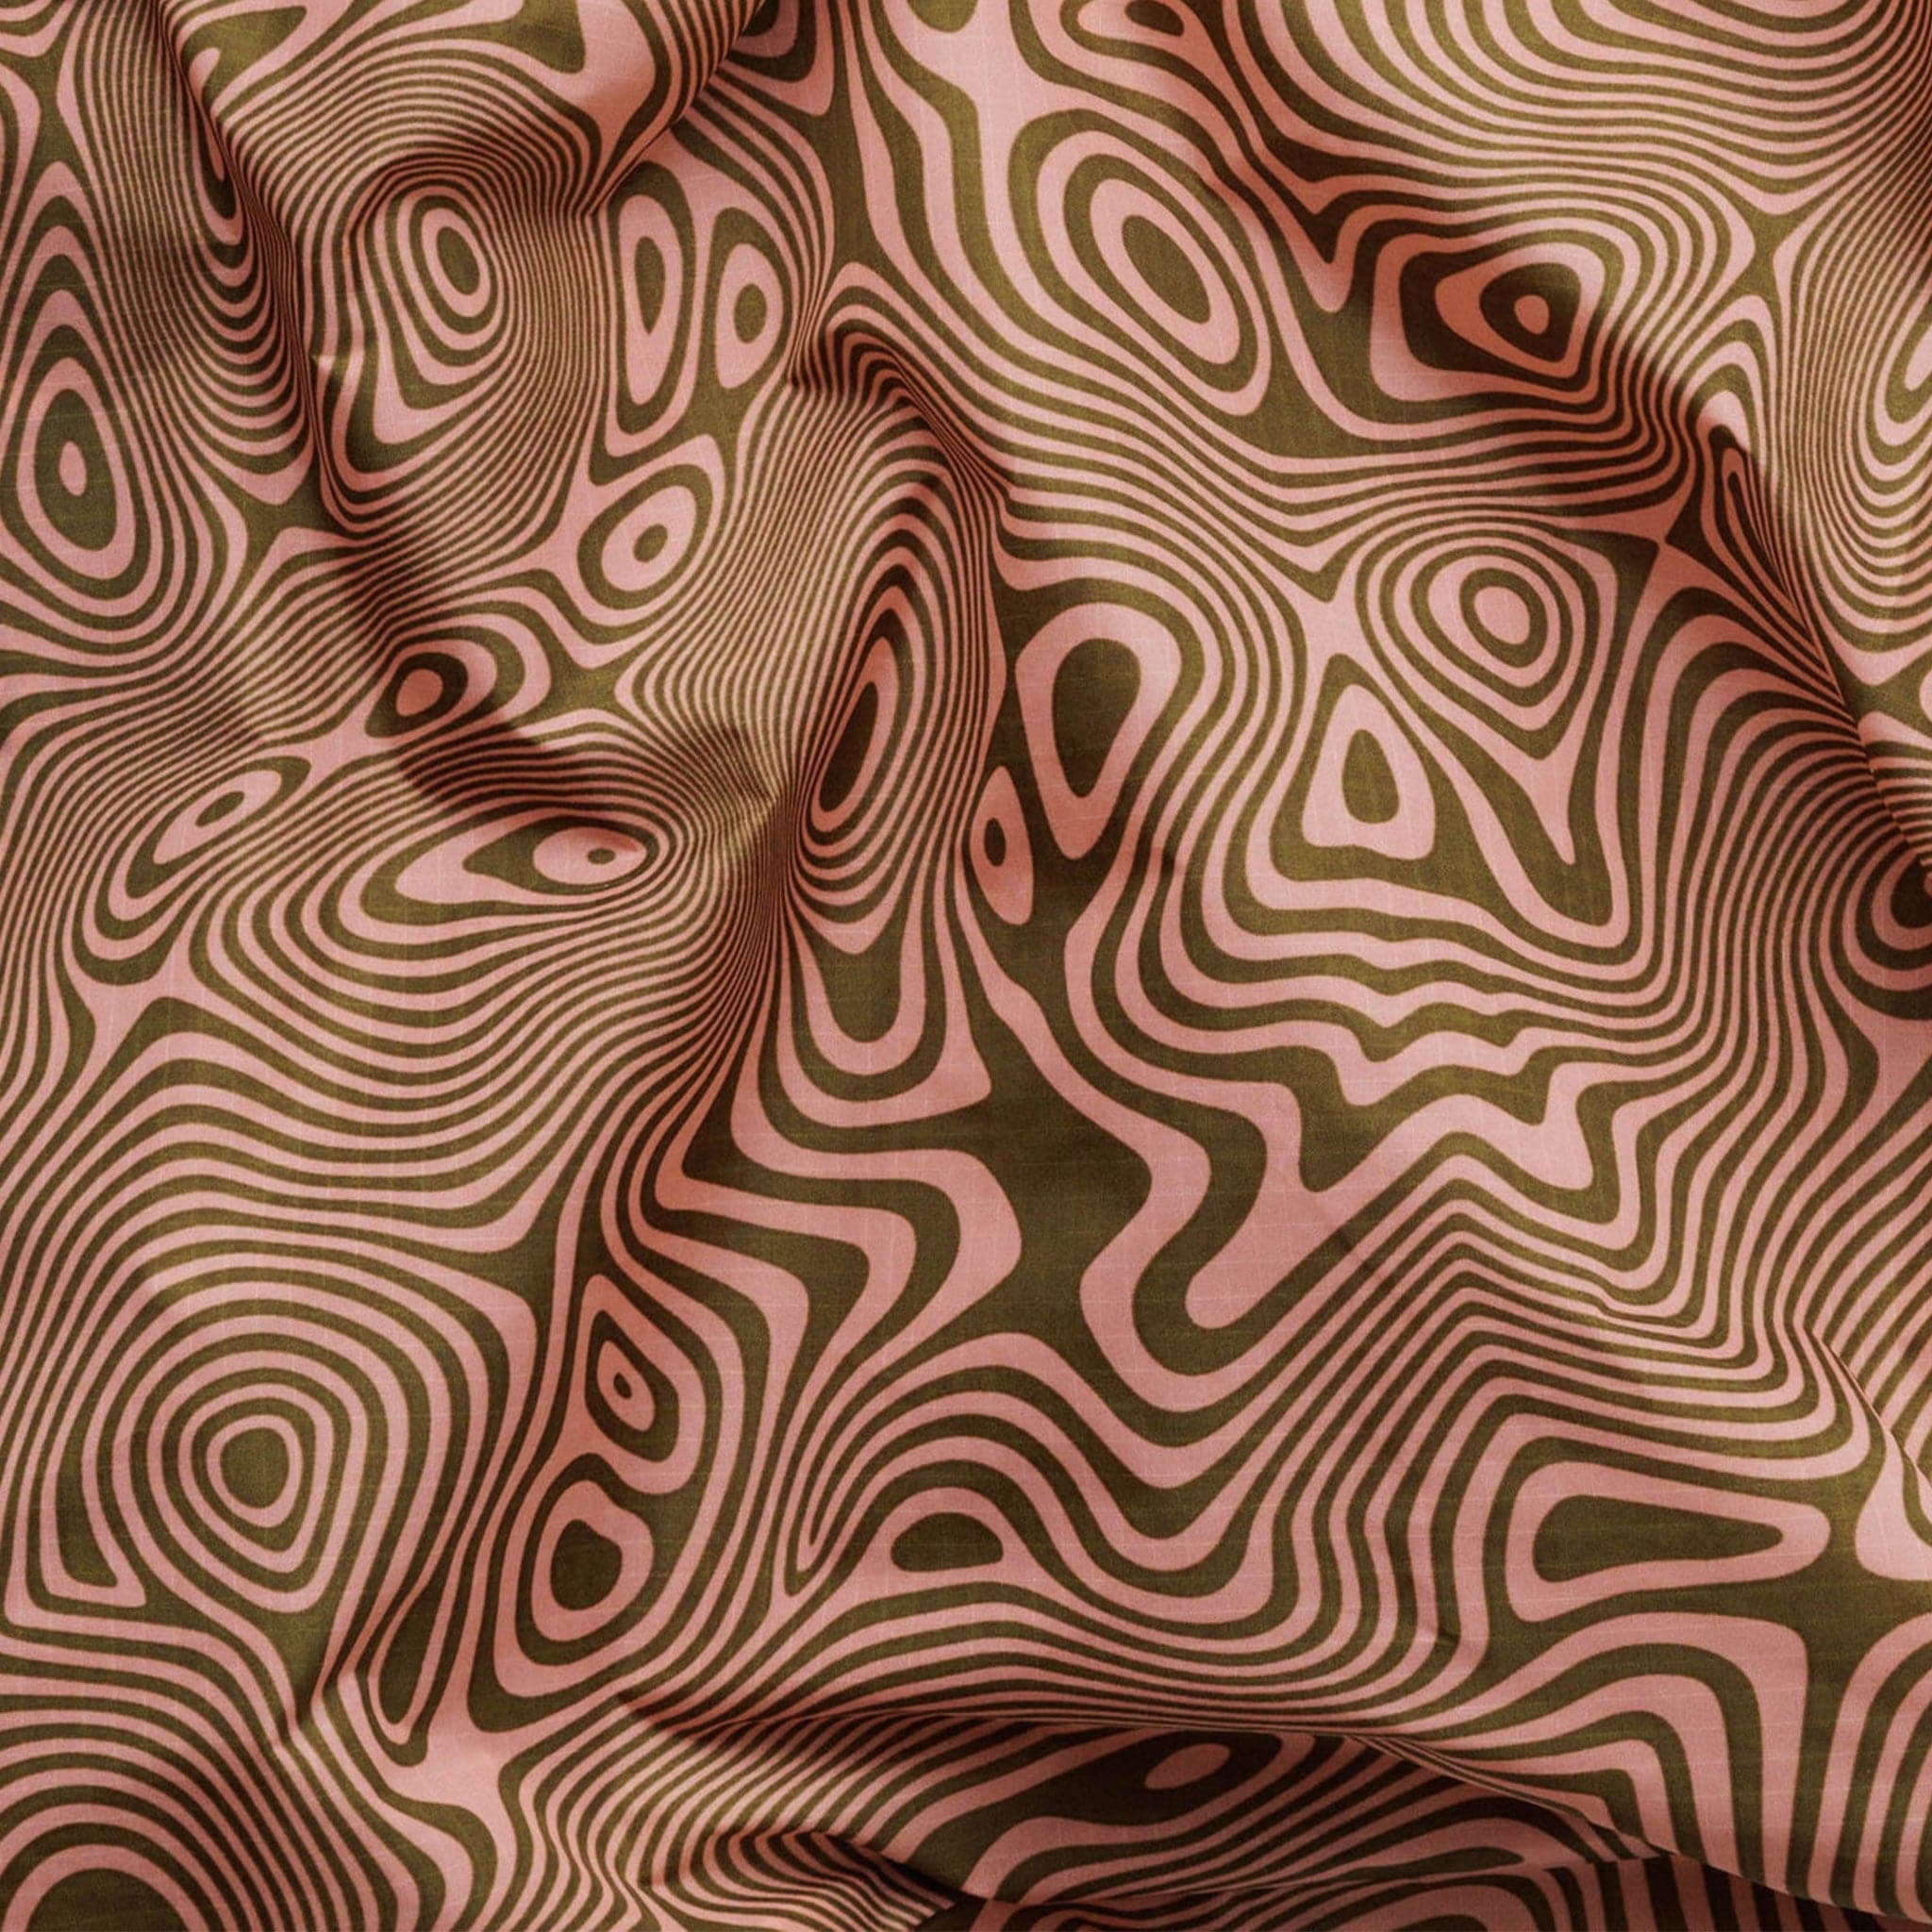 A nylon bag with an orange and cream wavy swirl pattern all over.